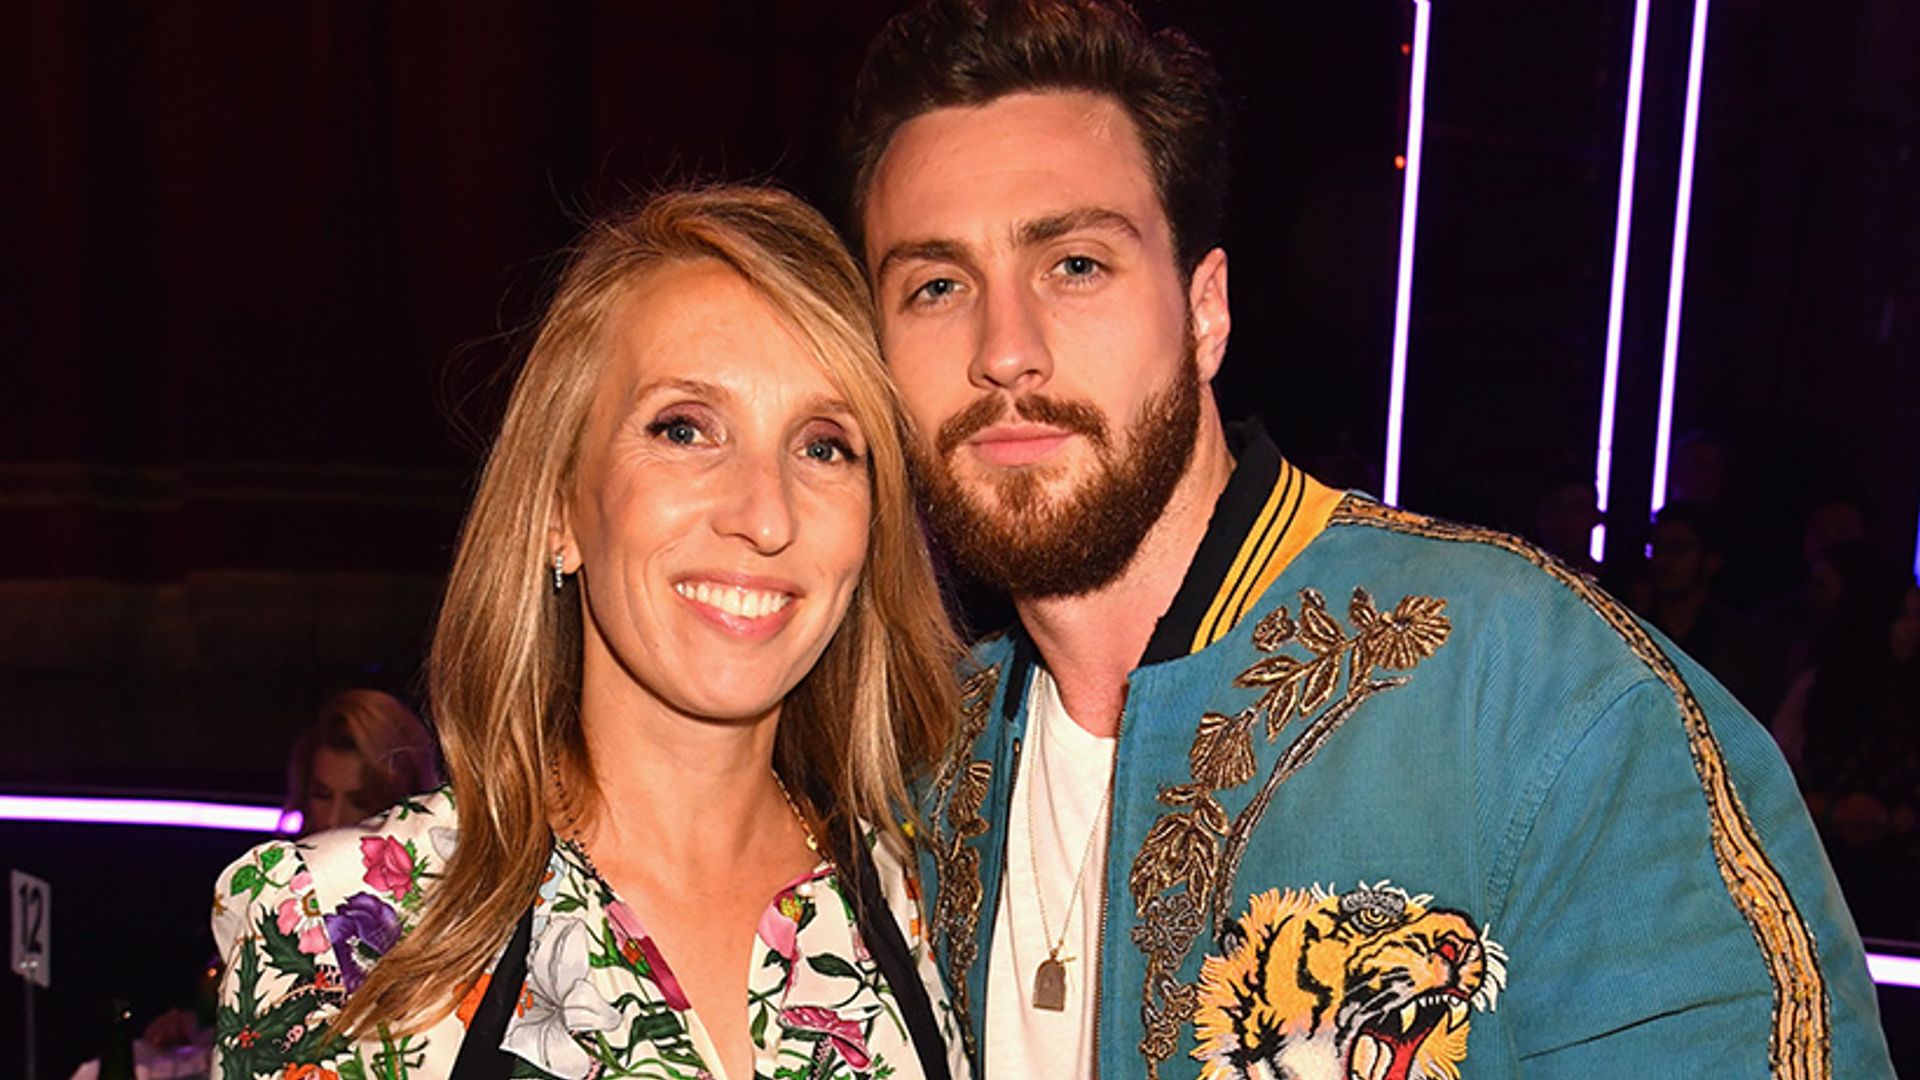 Sam Taylor-Johnson reveals her past battle with colon and breast cancer